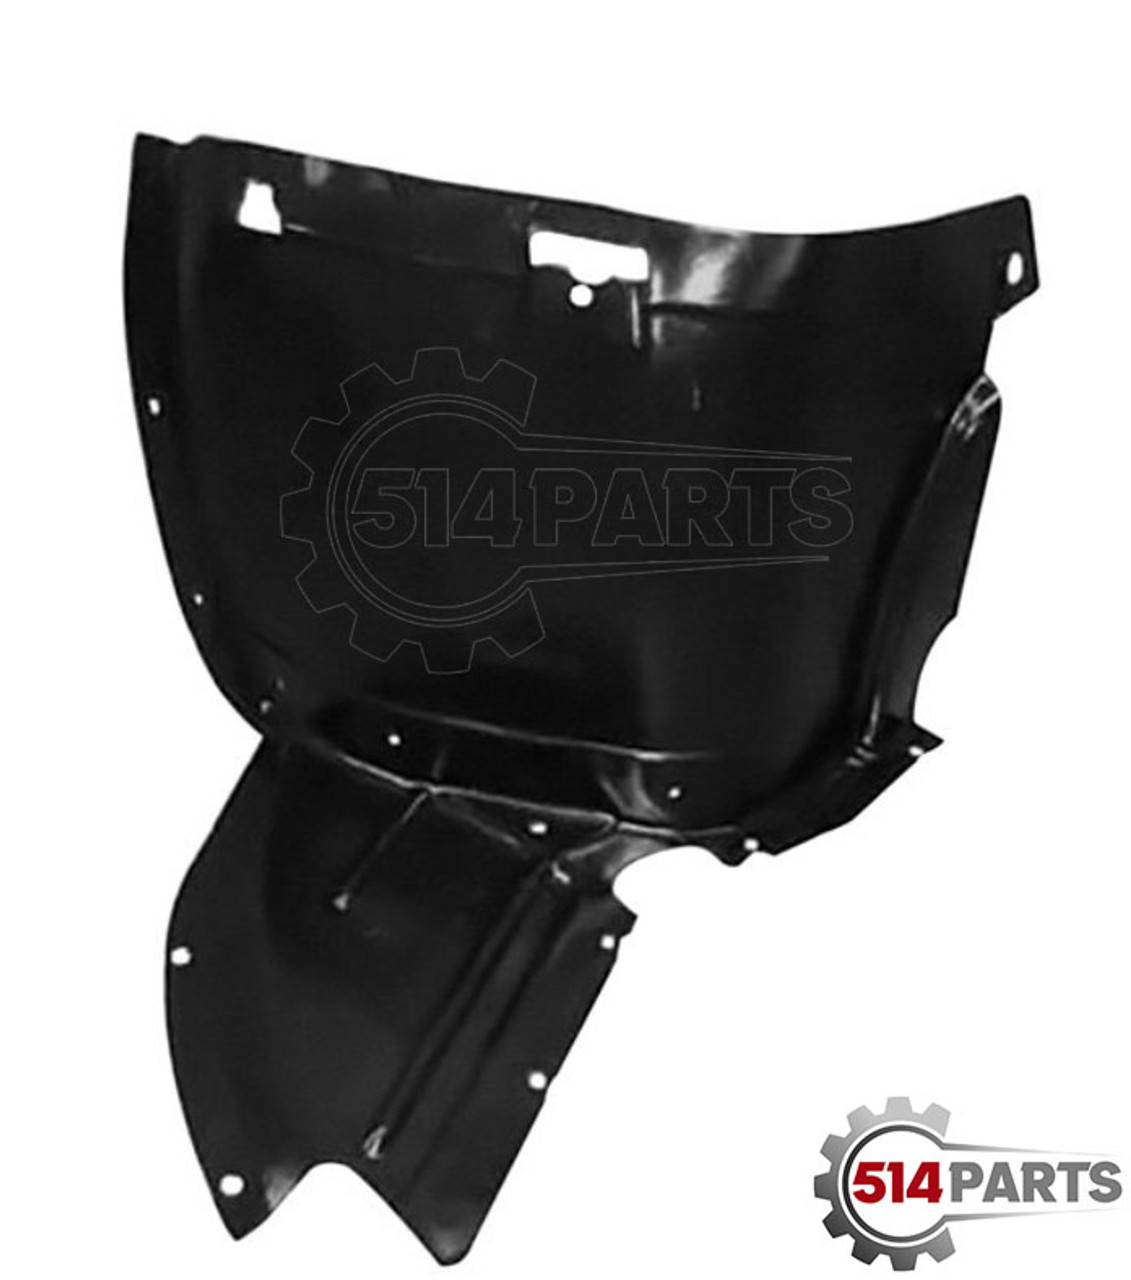 2006 - 2013 AUDI A3 FENDER LINER FRONT SECTION - FAUSSE AILE